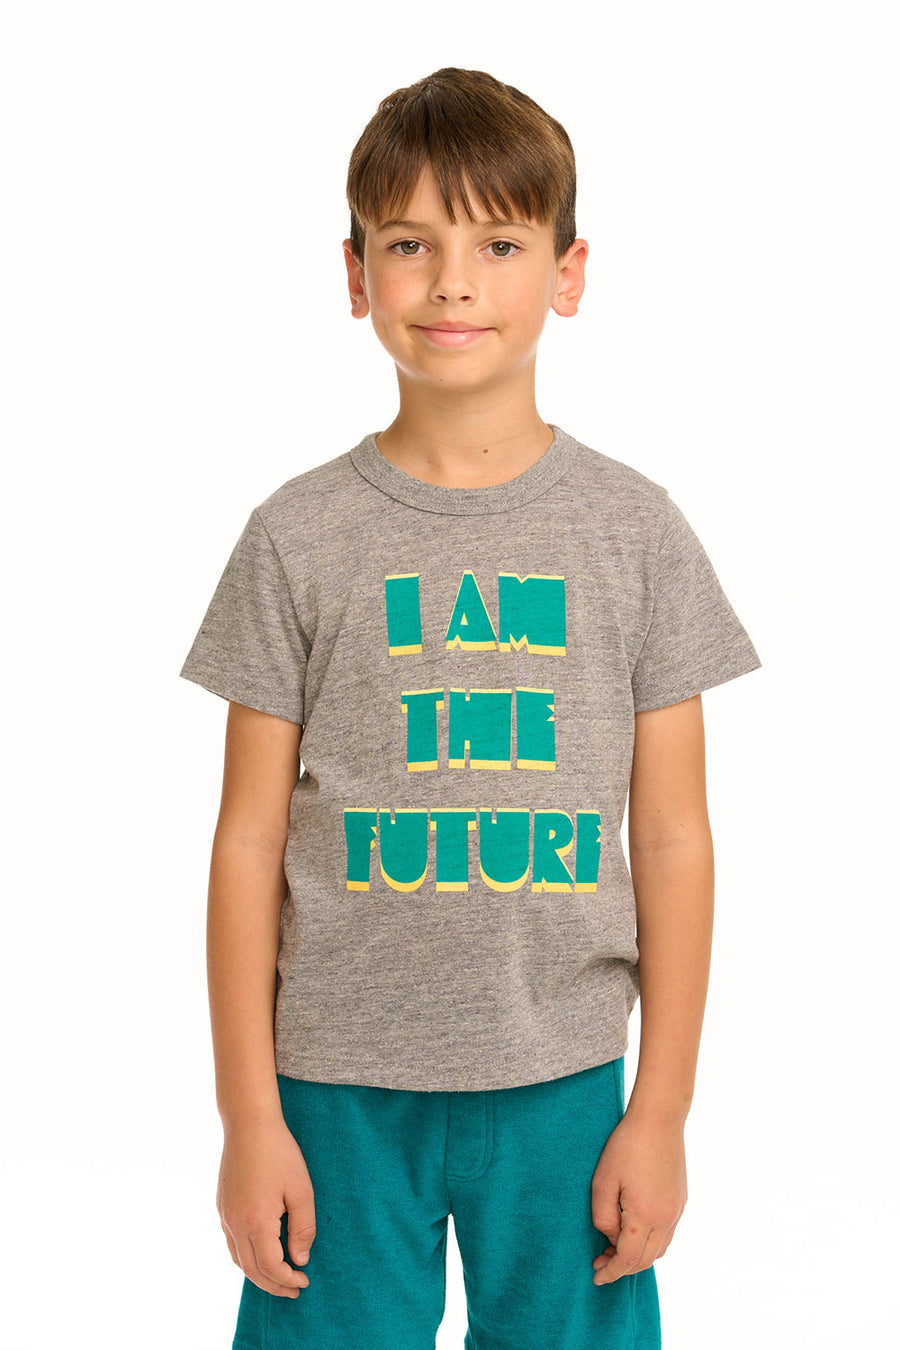 I Am The Future Boys Tee BOYS chaserbrand